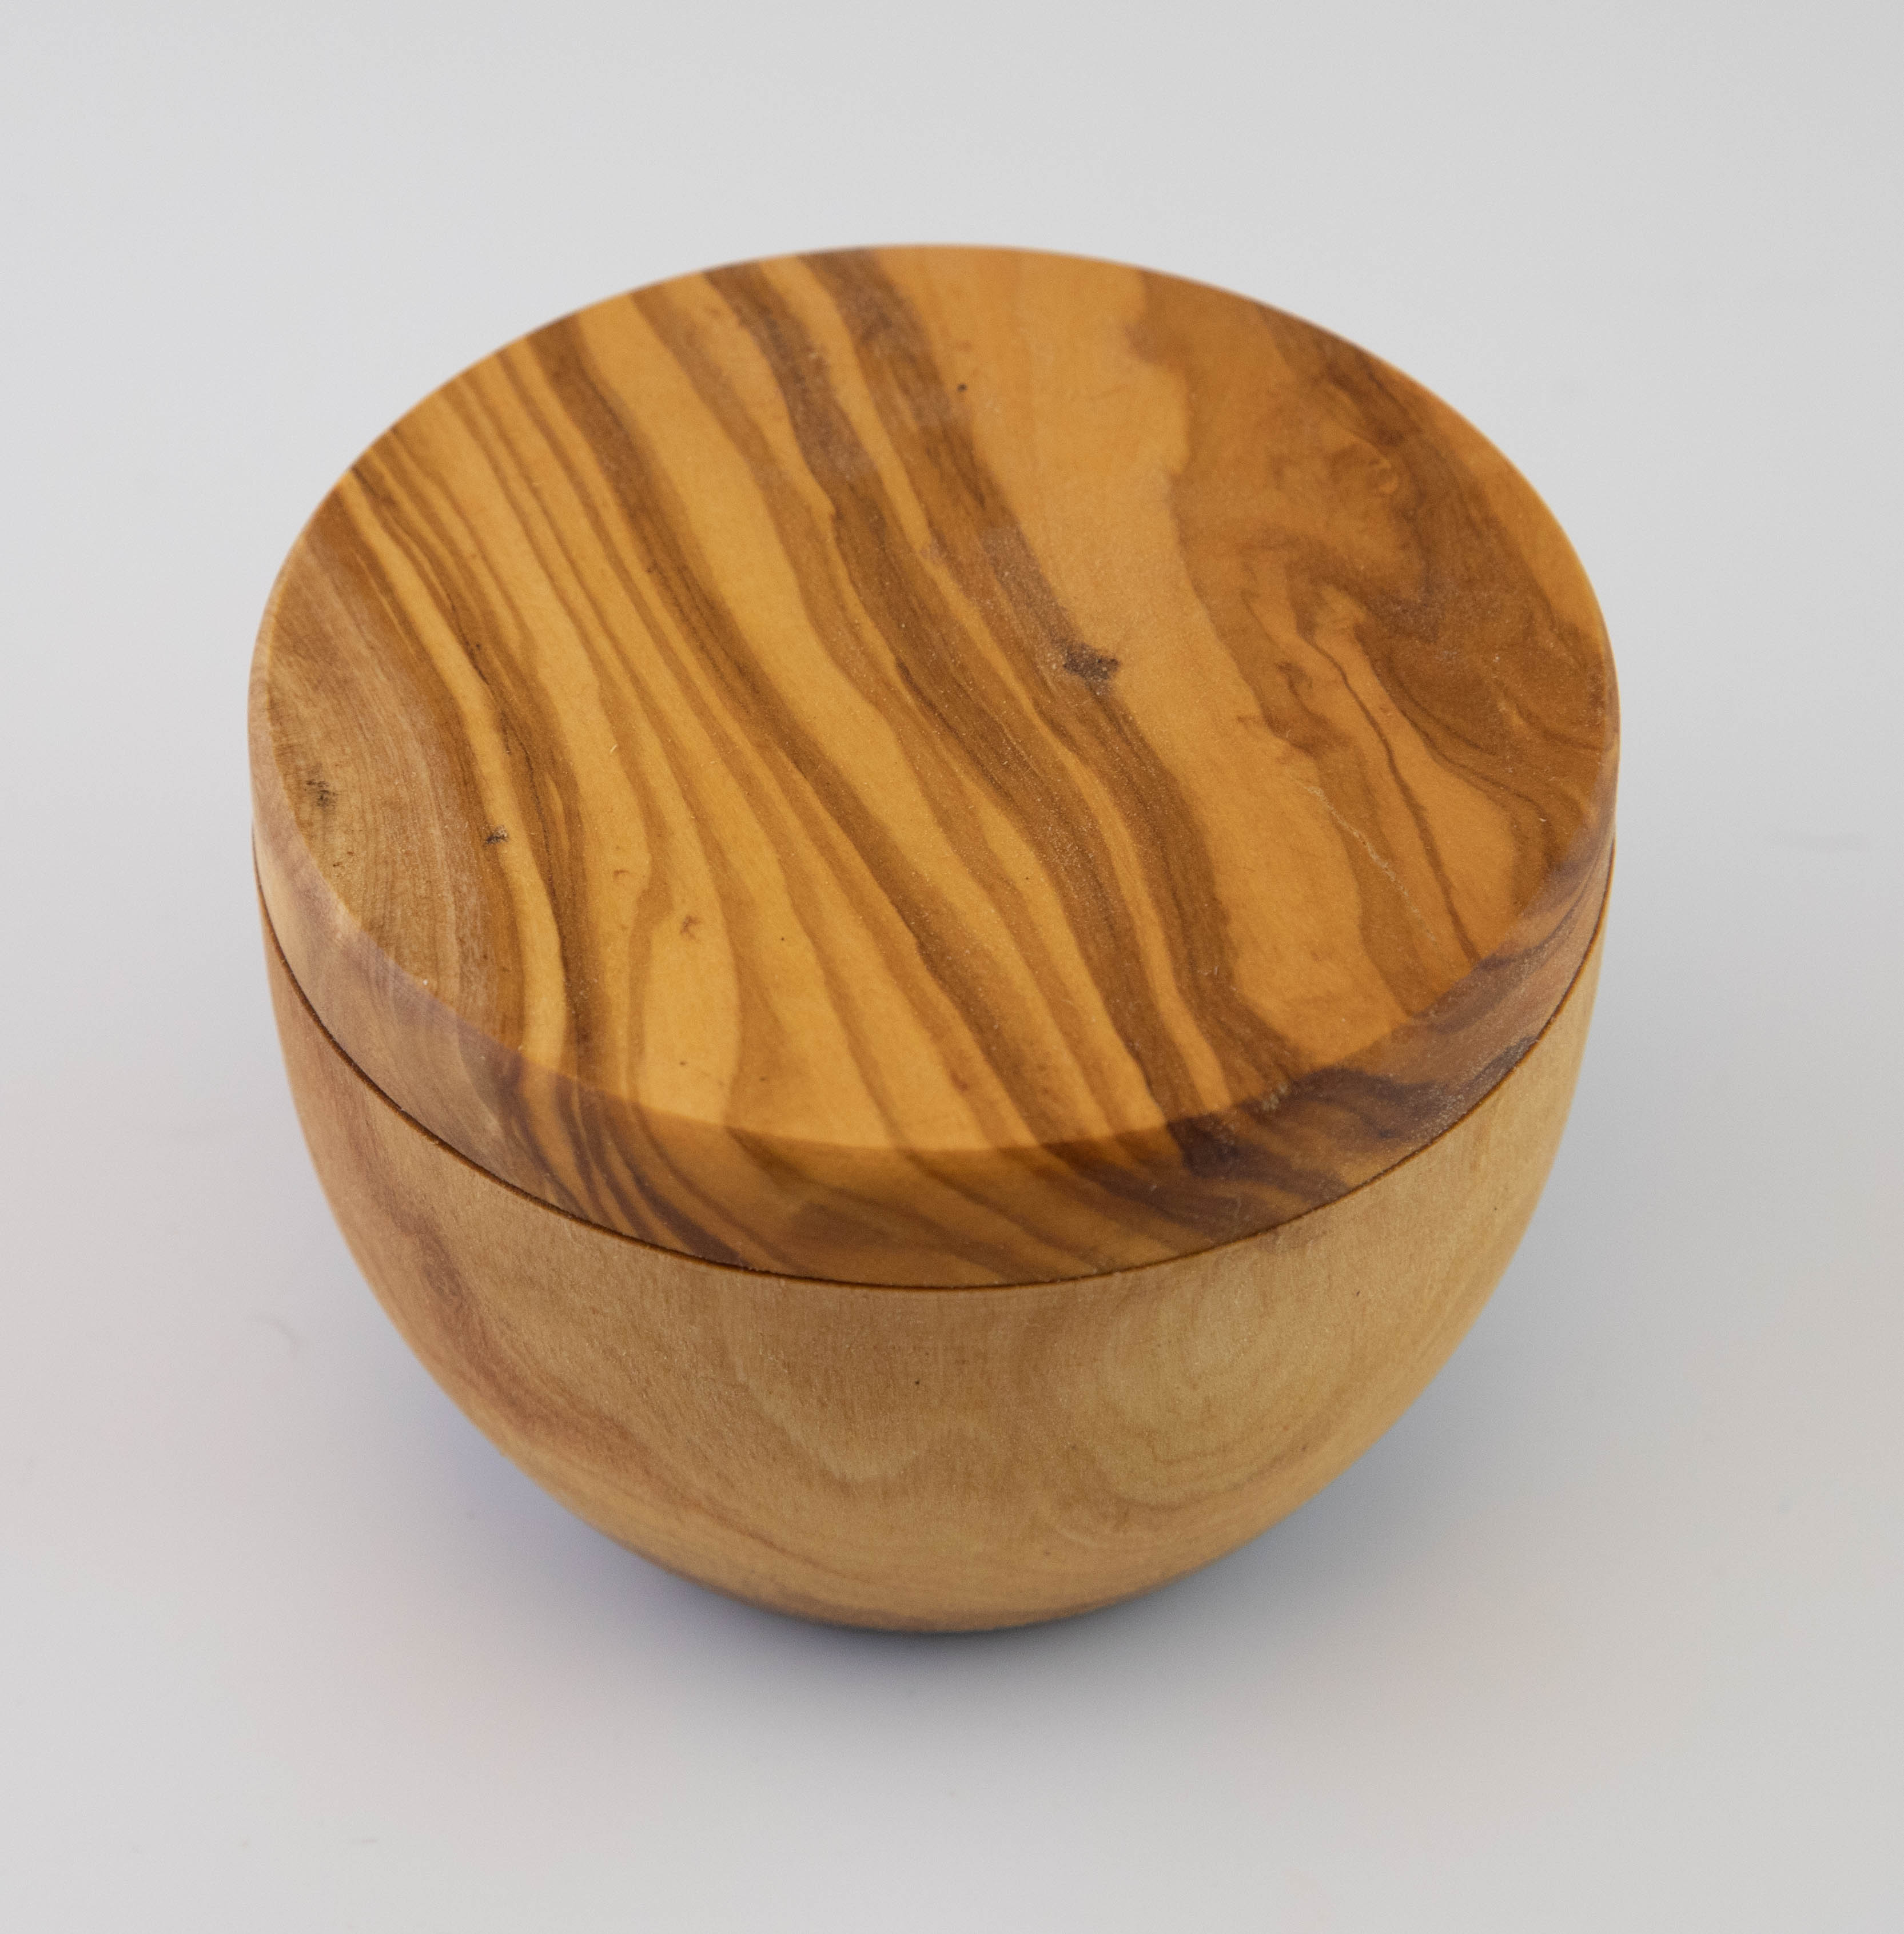 Sugar bowl made of olive wood with straight magnetic lid.